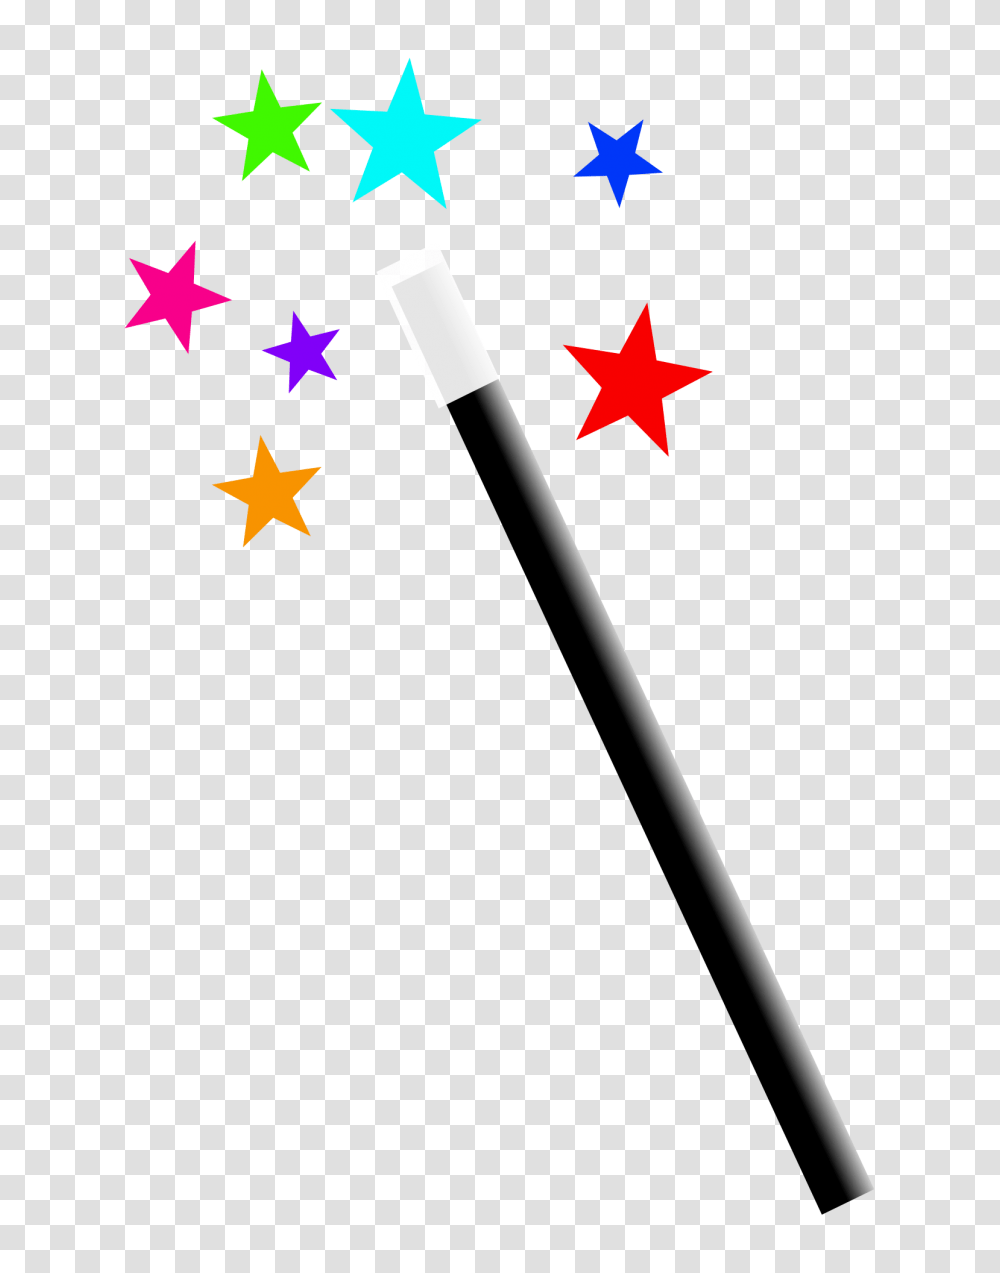 Magic Wand Group With Items, Star Symbol Transparent Png